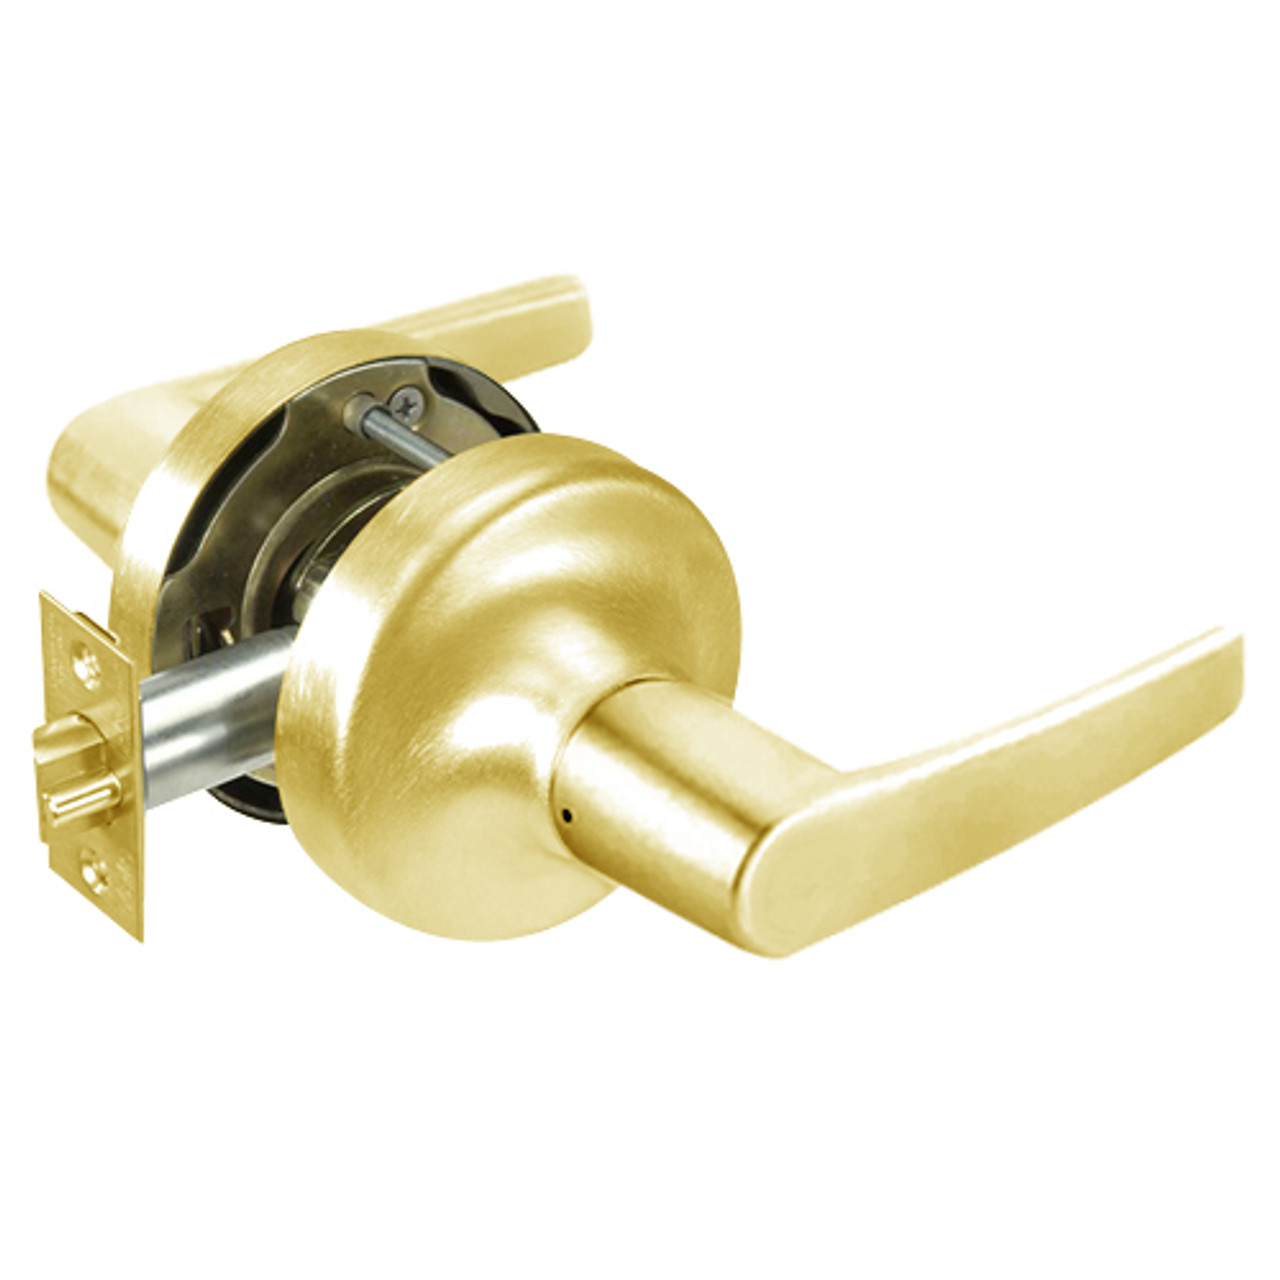 MO5301LN-605 Yale 5300LN Series Non-Keyed Passage or Closet Latchset Cylindrical Locks with Monroe Lever in Bright Brass